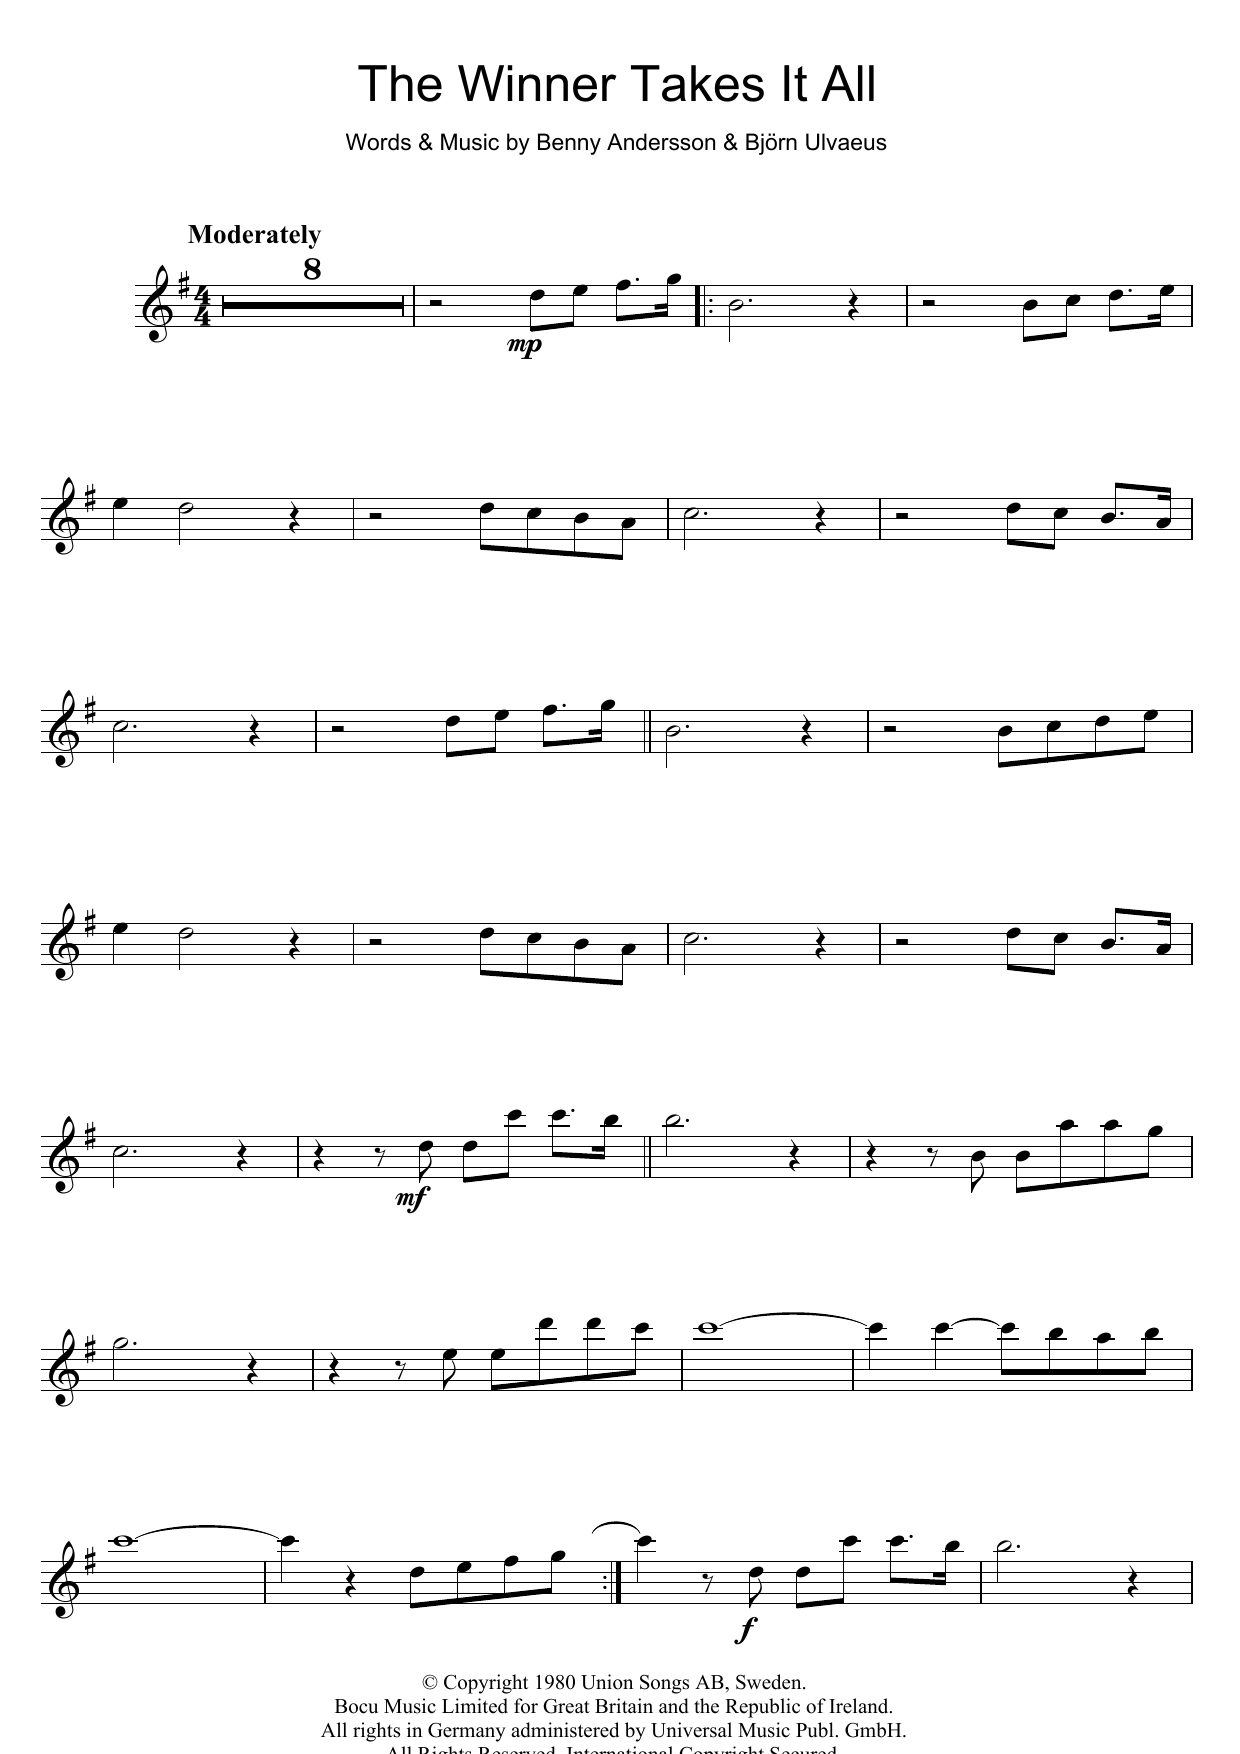 Download ABBA The Winner Takes It All Sheet Music